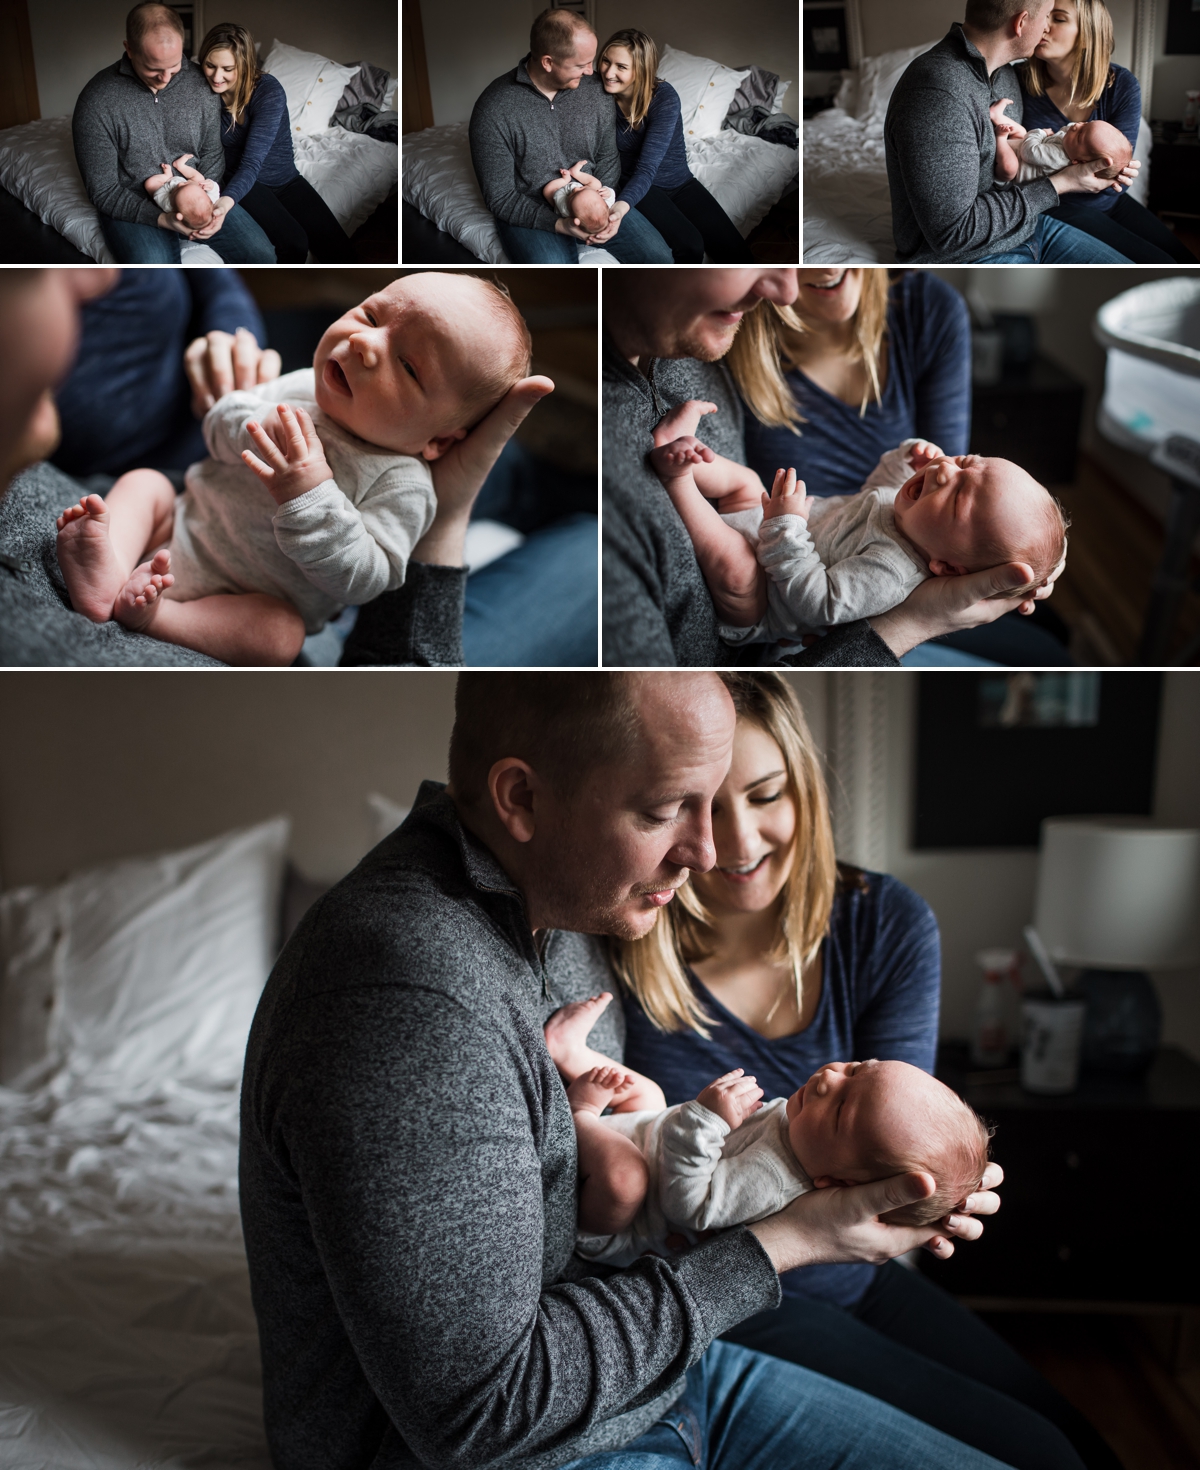 seattle newborn family lifestyle photographer | elena s blair photography | family at home with newborn baby boy oliver